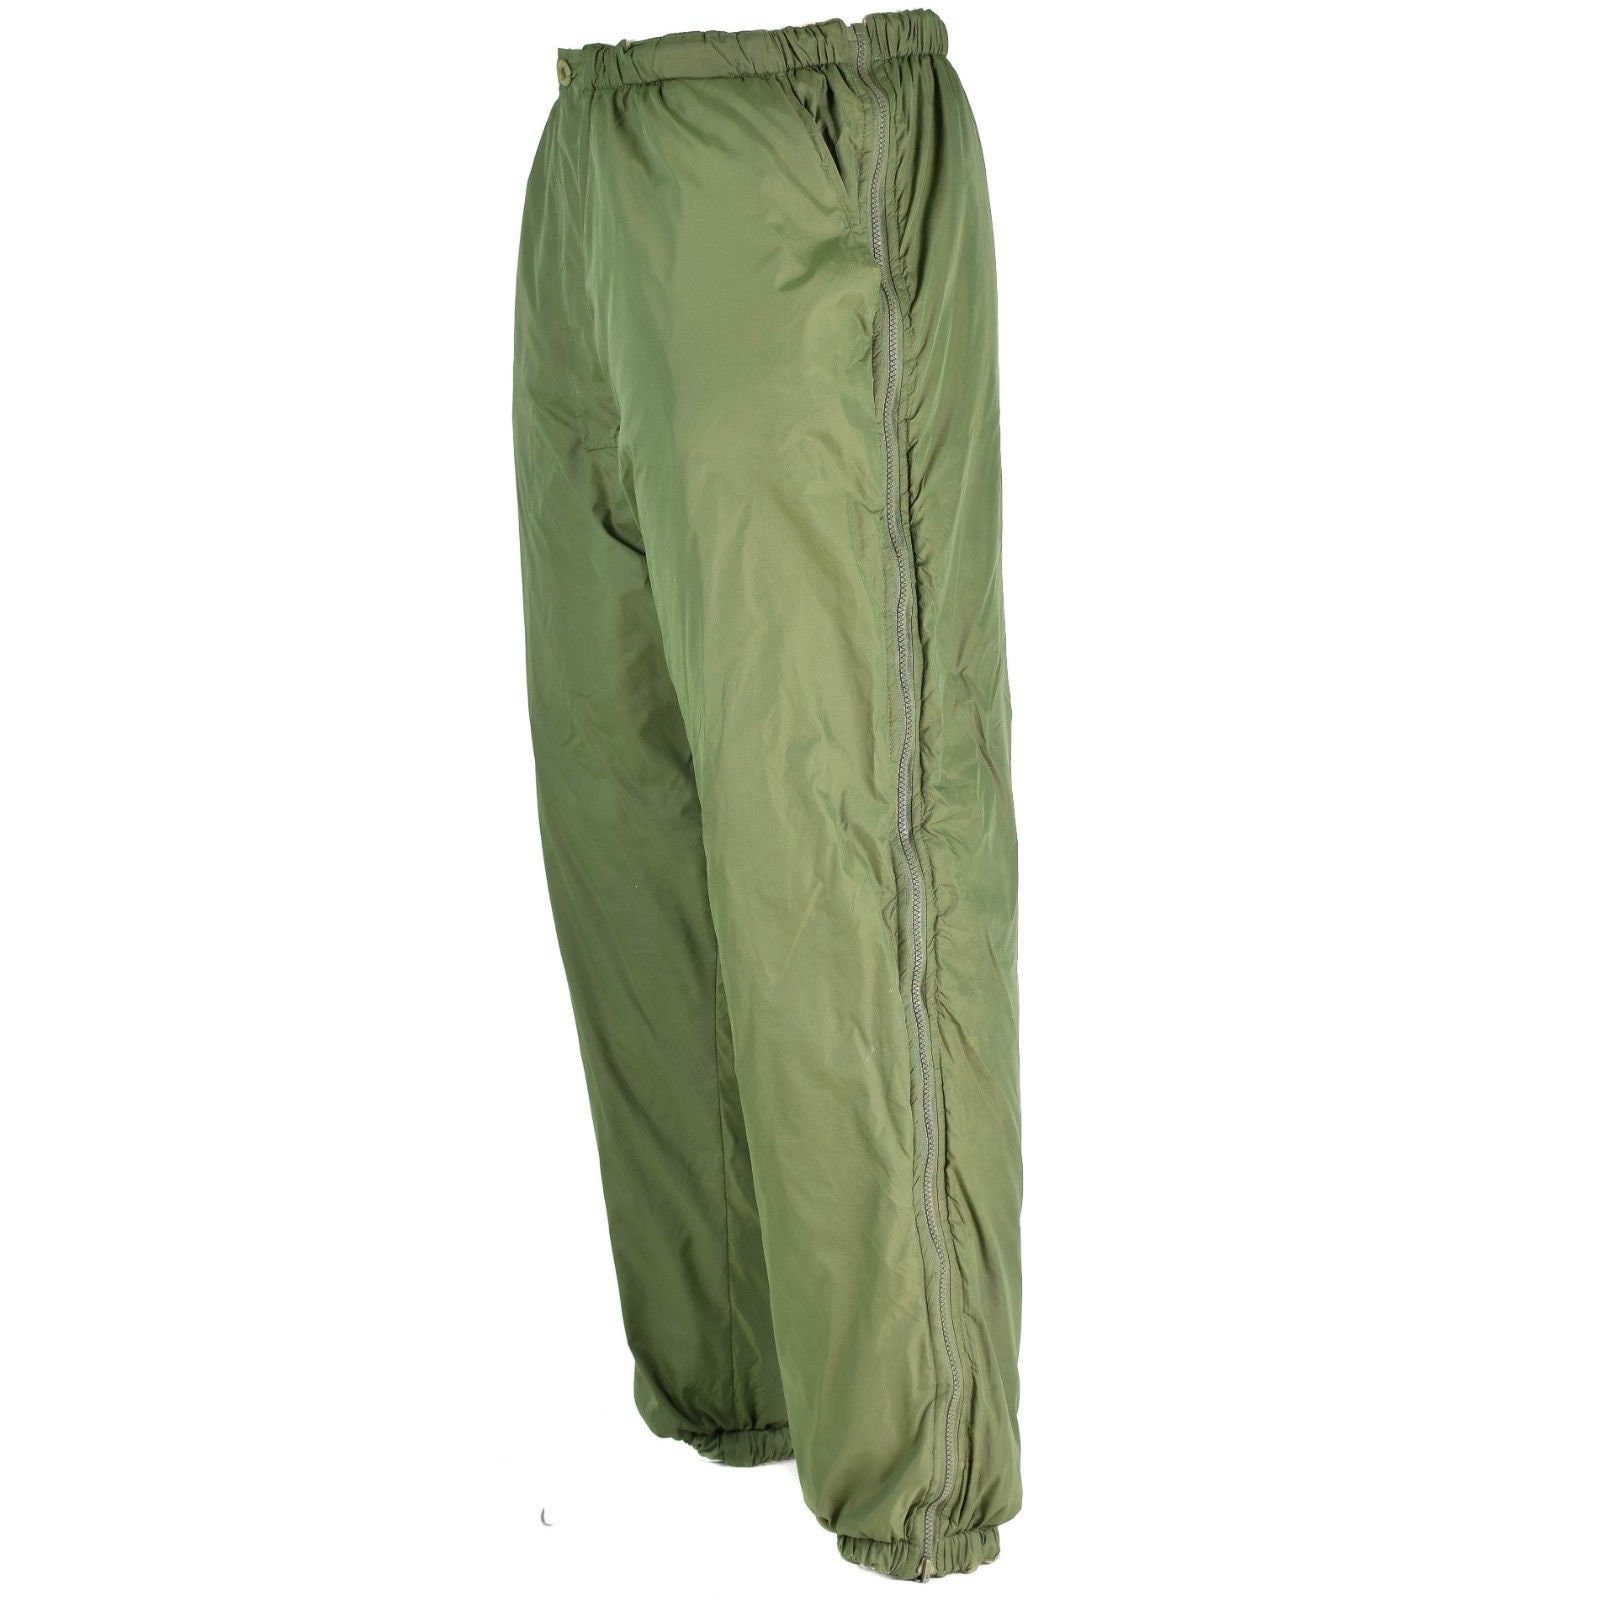 British army reversible pants thermal Green Khaki cold weather trousers